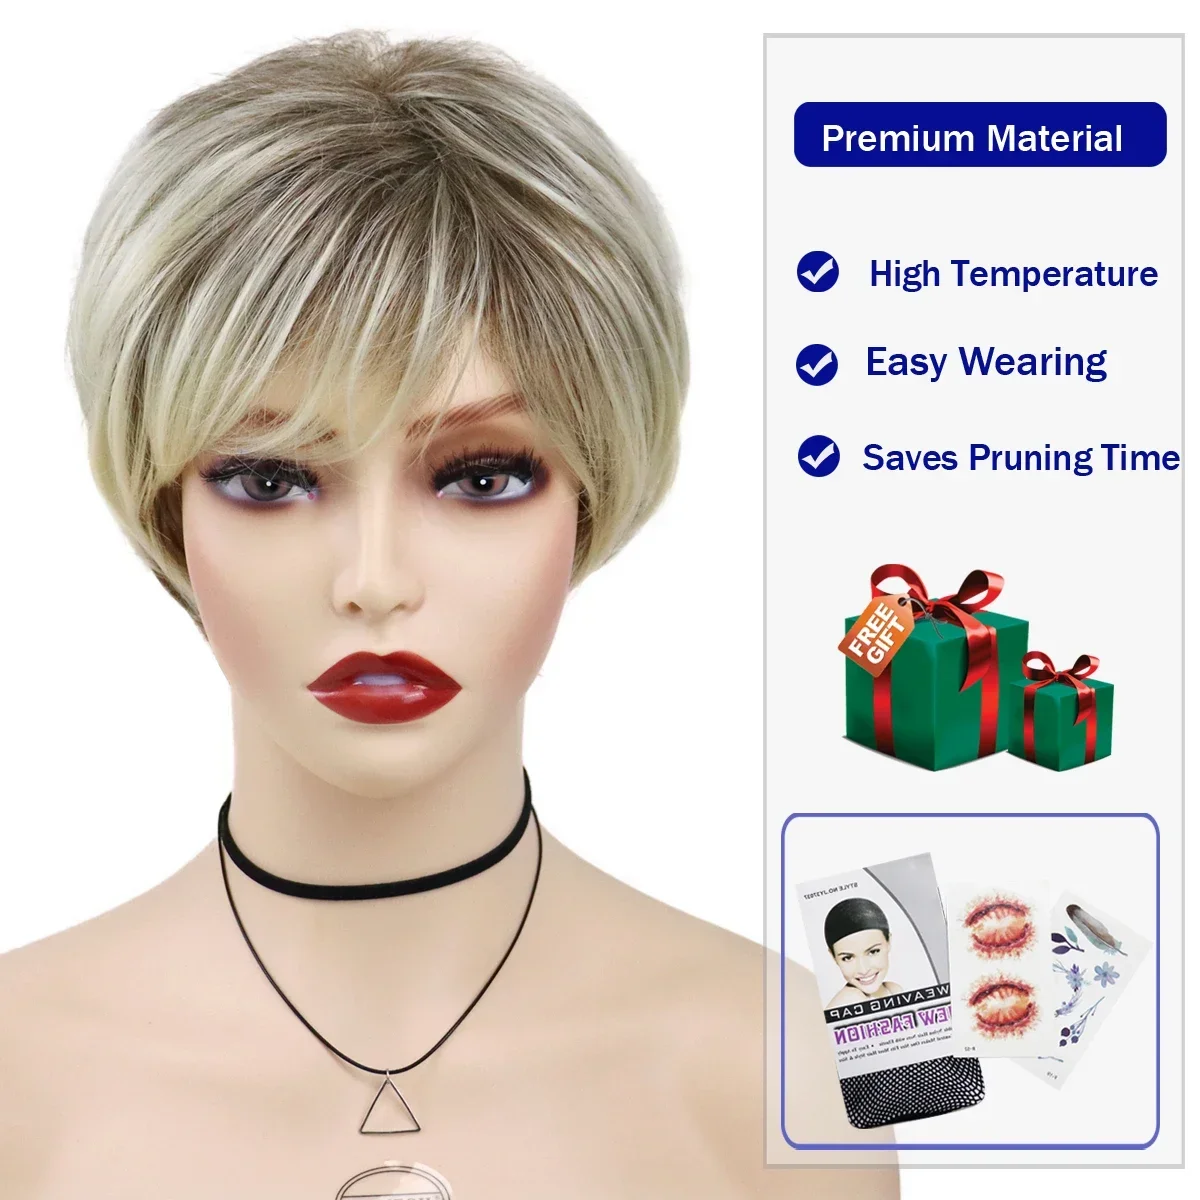 Old Lady Synthetic Hair Blonde Wig with Bangs Natural Short Wig for White Woman High Temperature Blond Ombre Mommy Wig for Daily